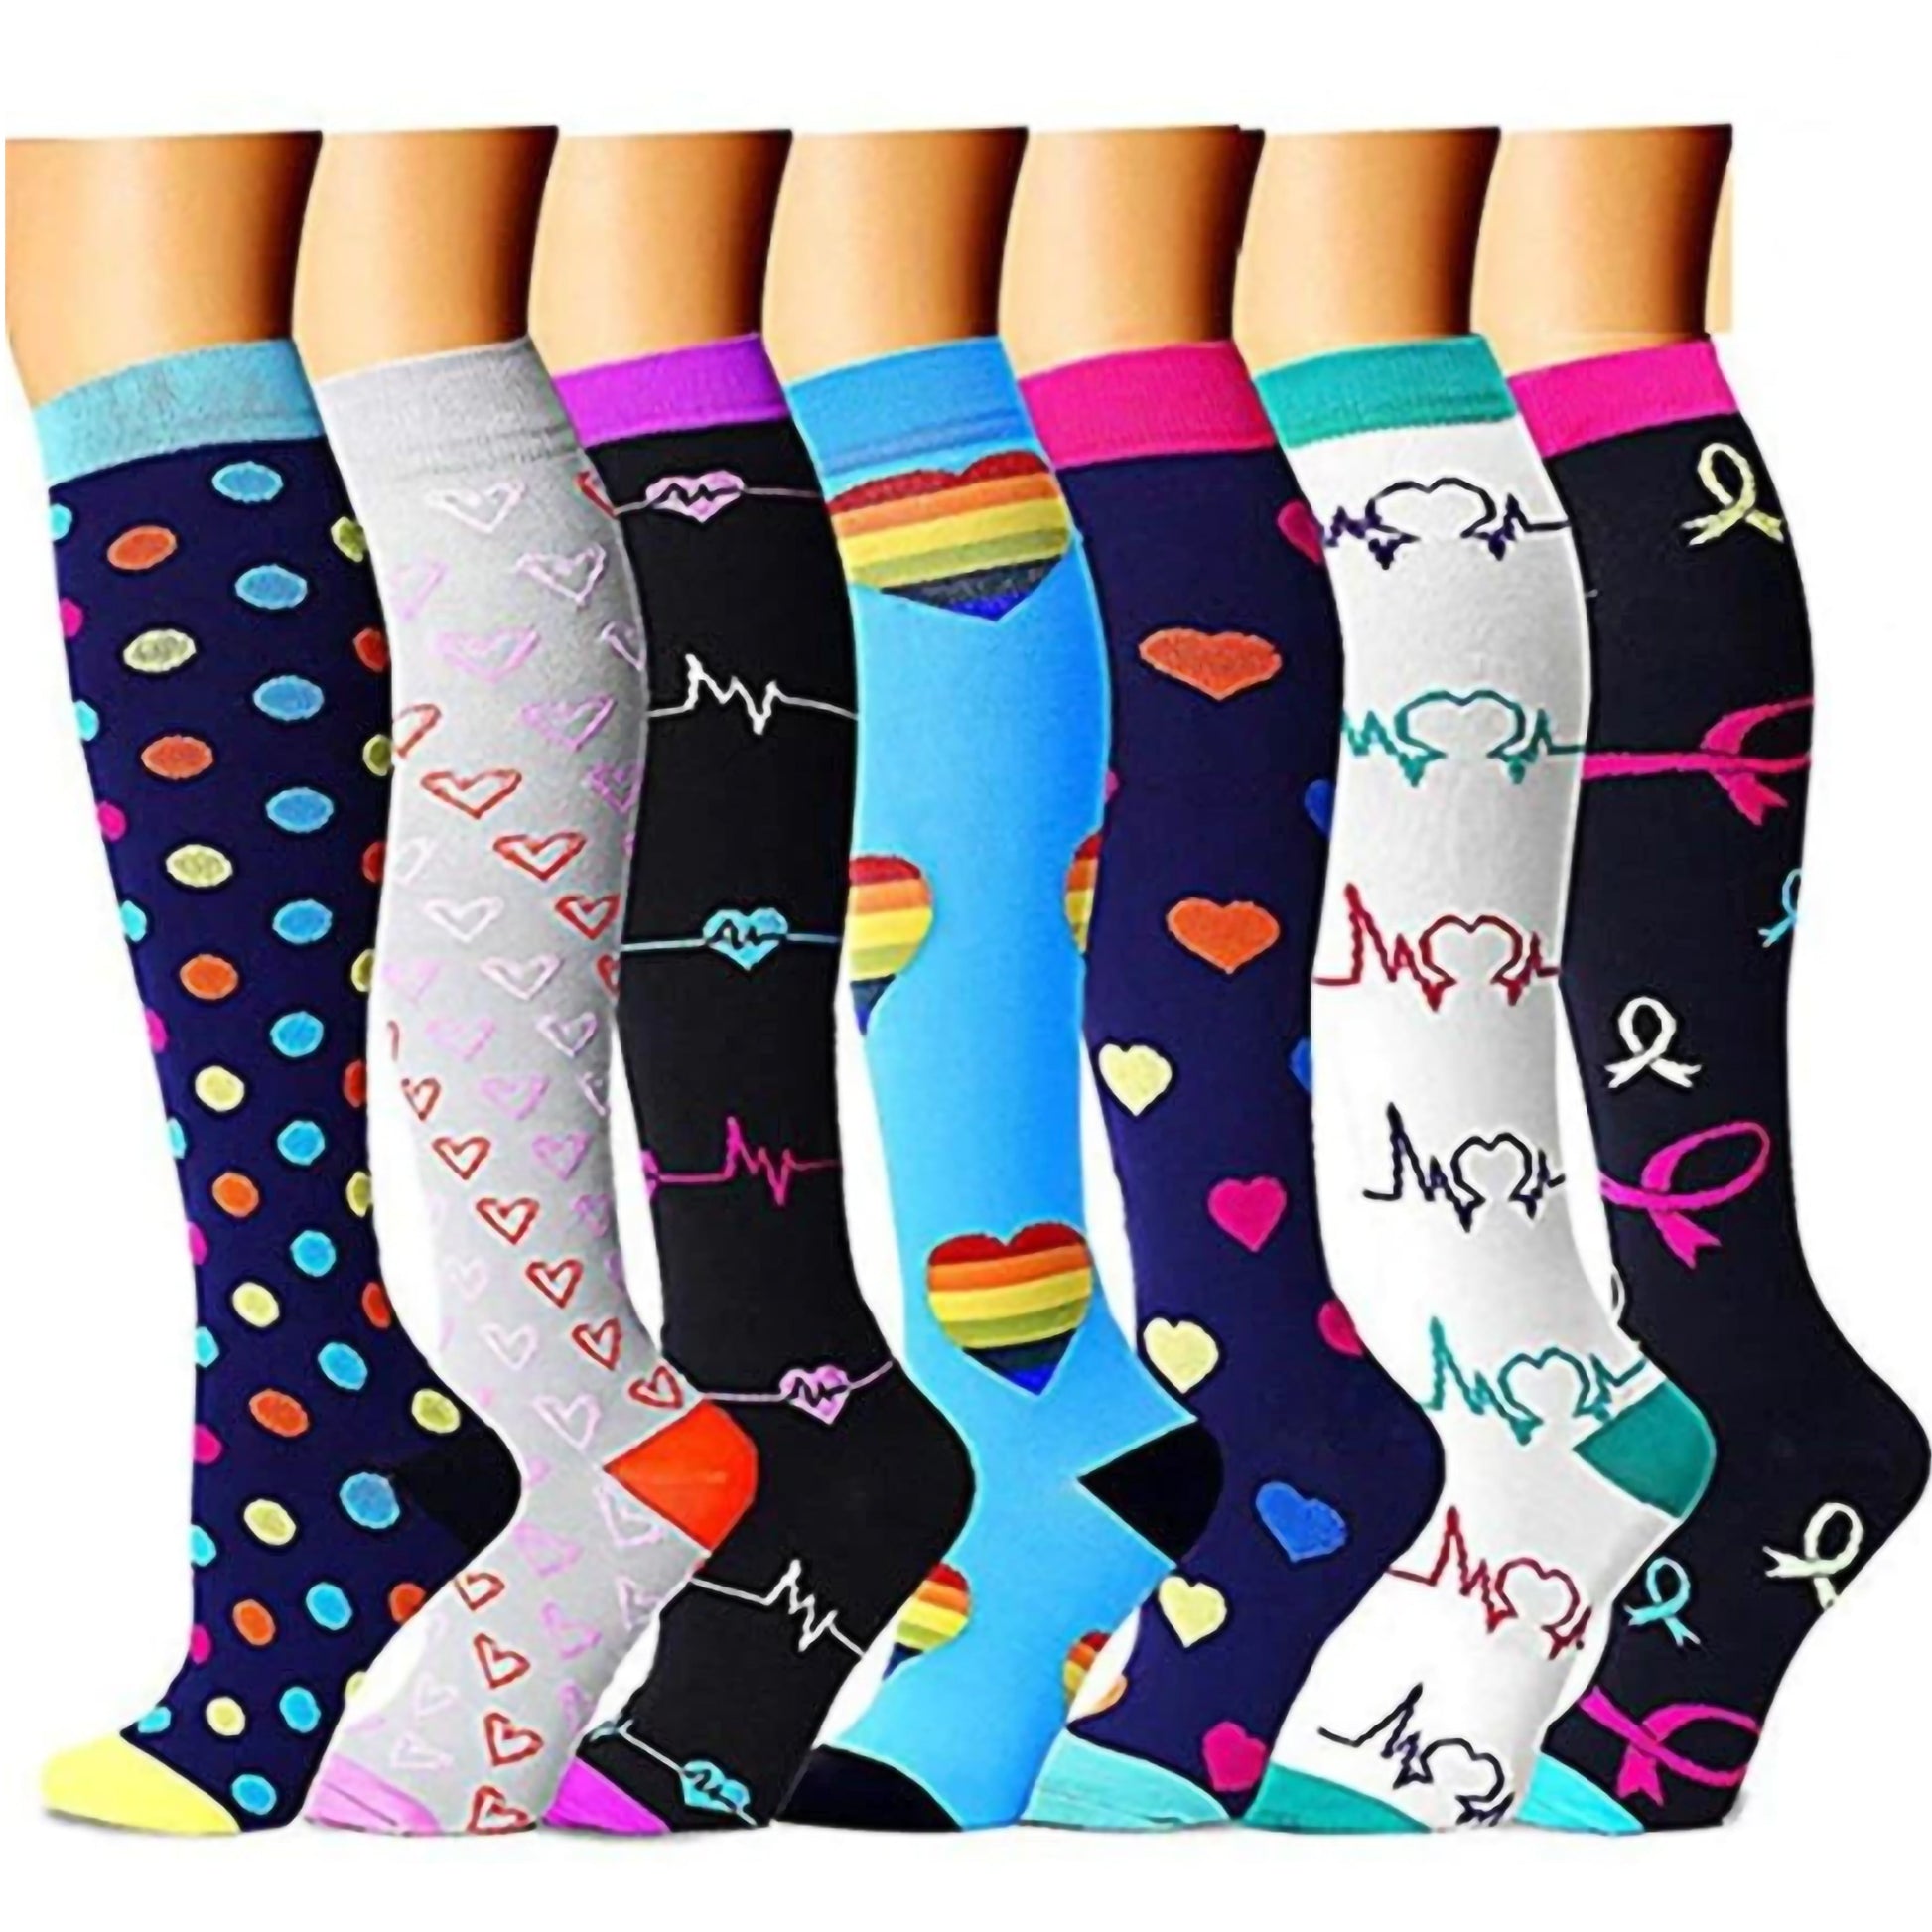 Quality Compression Socks Pack 10 (6 Pairs + 4 Pairs Free) - Best Seller / S/M